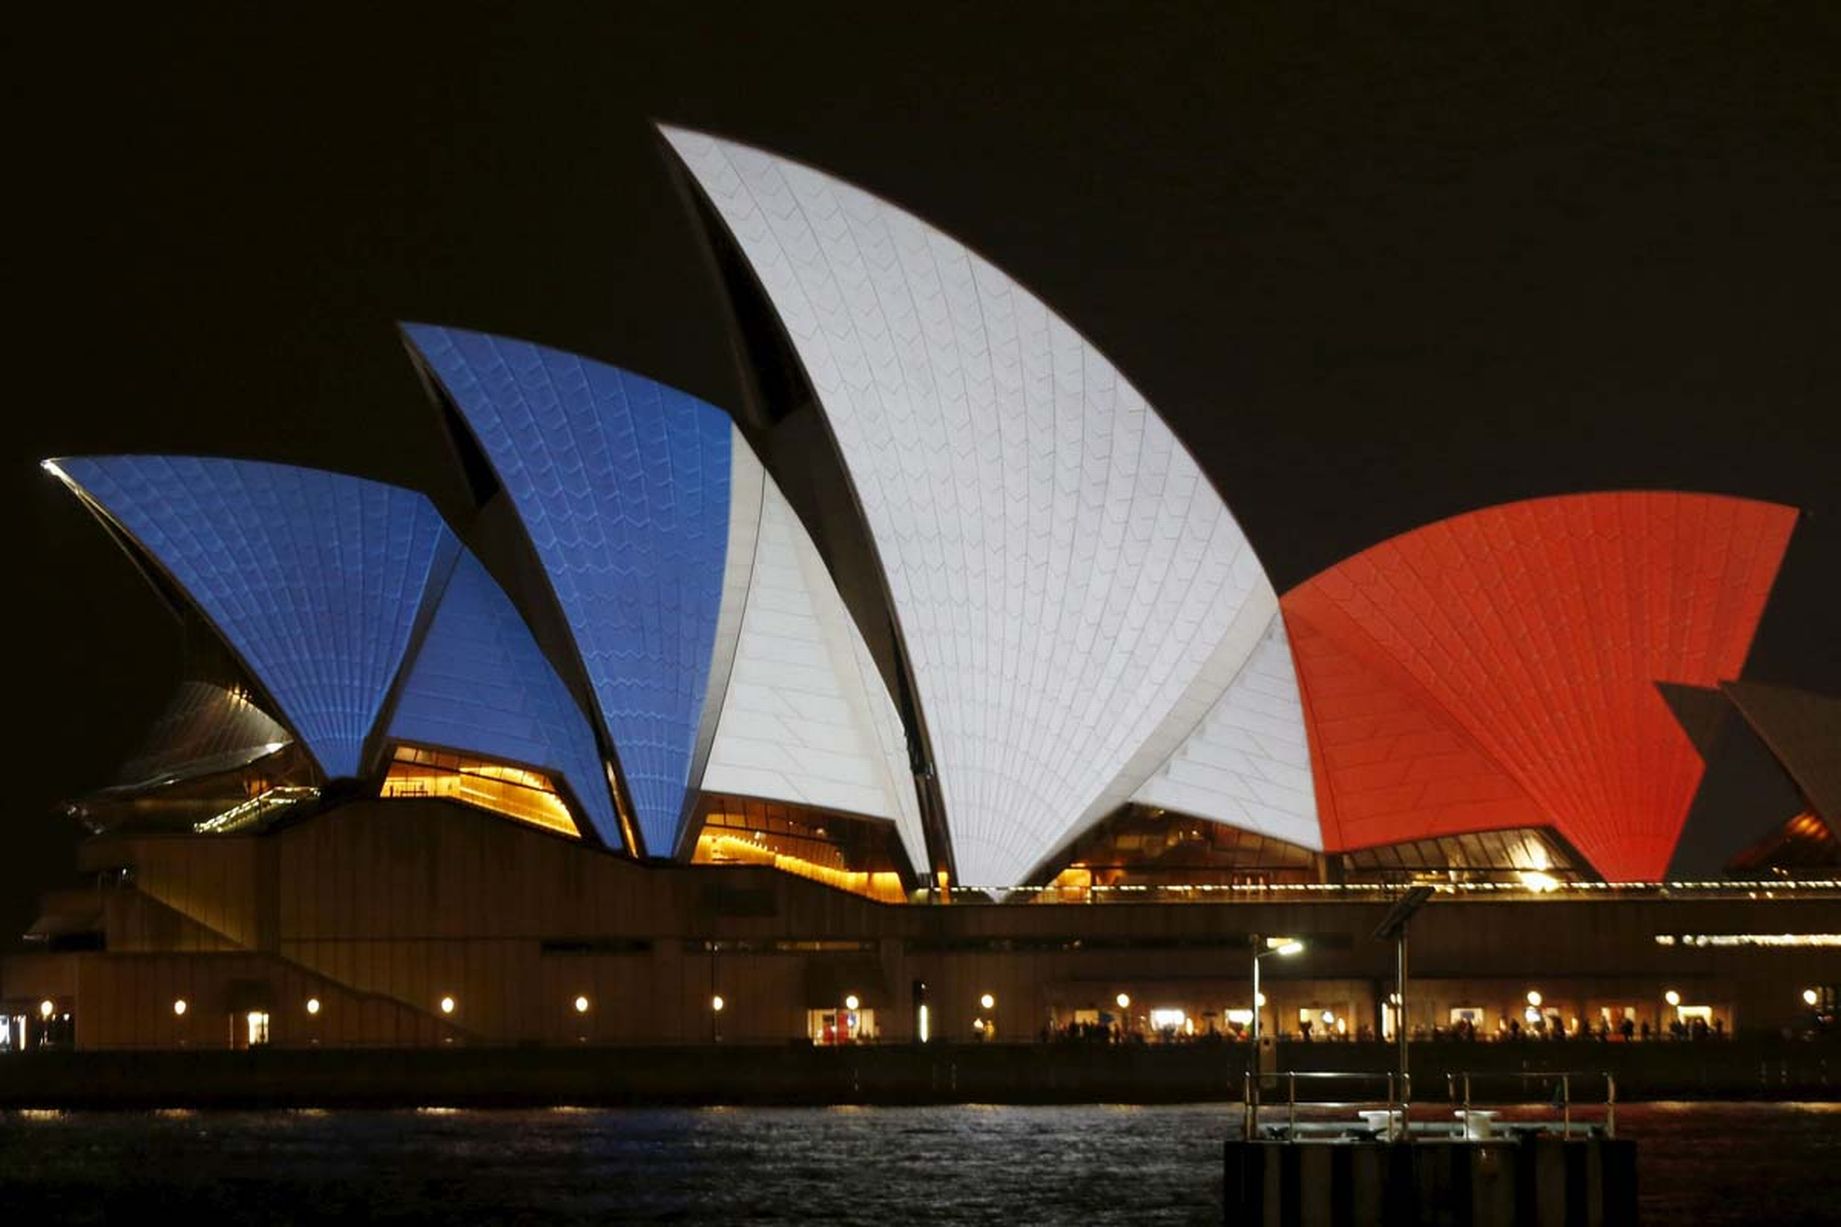 paris terror attacks pictures, paris terror attacks solidarity, paris terror attacks solidarity around the world, paris terror attacks landmarks solidarity pictures, terror attack paris november 2015, lights of solidarity paris terror attacks, The lights of the Eiffel Tower are off following the terror attacks., Paris terror attacks: World landmarks light up in show of unity with France following deadly atrocities, Sydney Opera House lit up in blue, white and red as world cities adopt the Tricolore